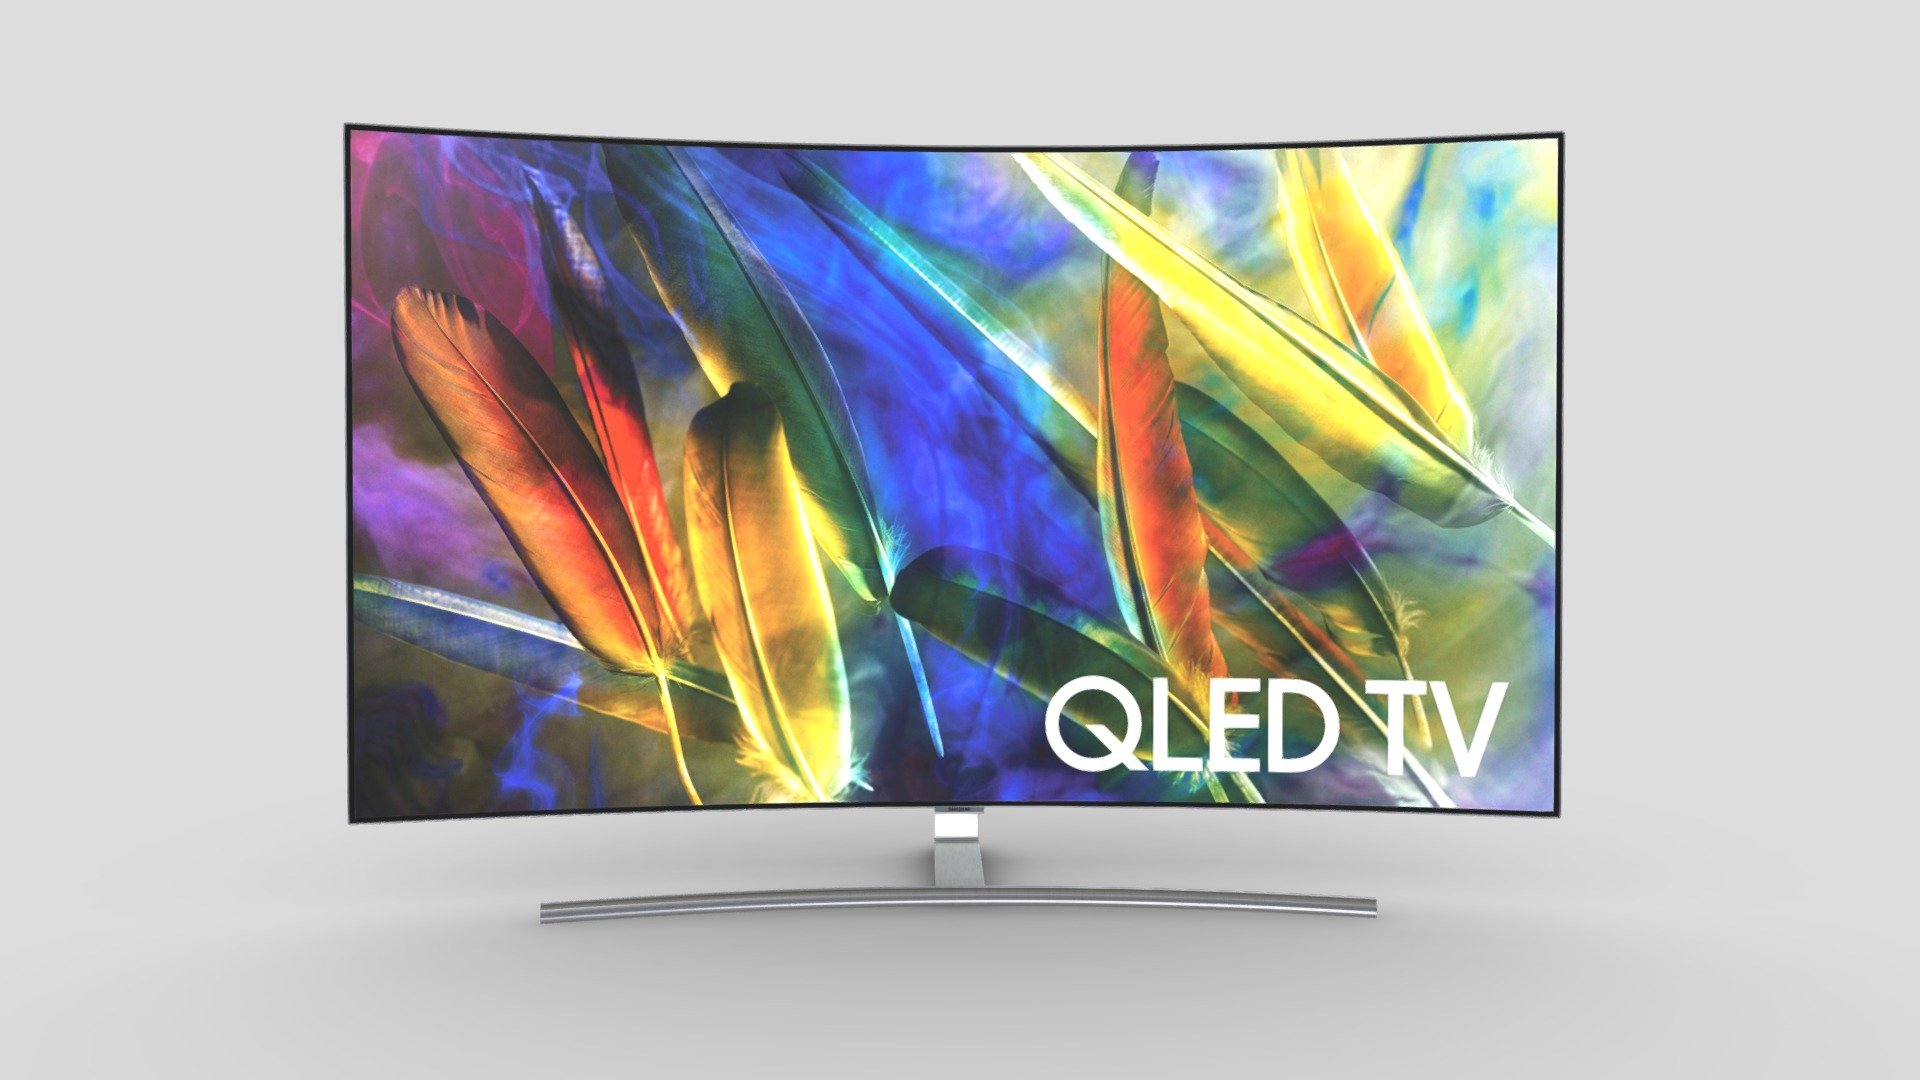 Hi, I'm Frezzy. I am leader of Cgivn studio. We are a team of talented artists working together since 2013.
If you want hire me to do 3d model please touch me at:cgivn.studio Thanks you! - Samsung Q7C 55 Inch Curved QLED 4K TV - Buy Royalty Free 3D model by Frezzy3D 3d model